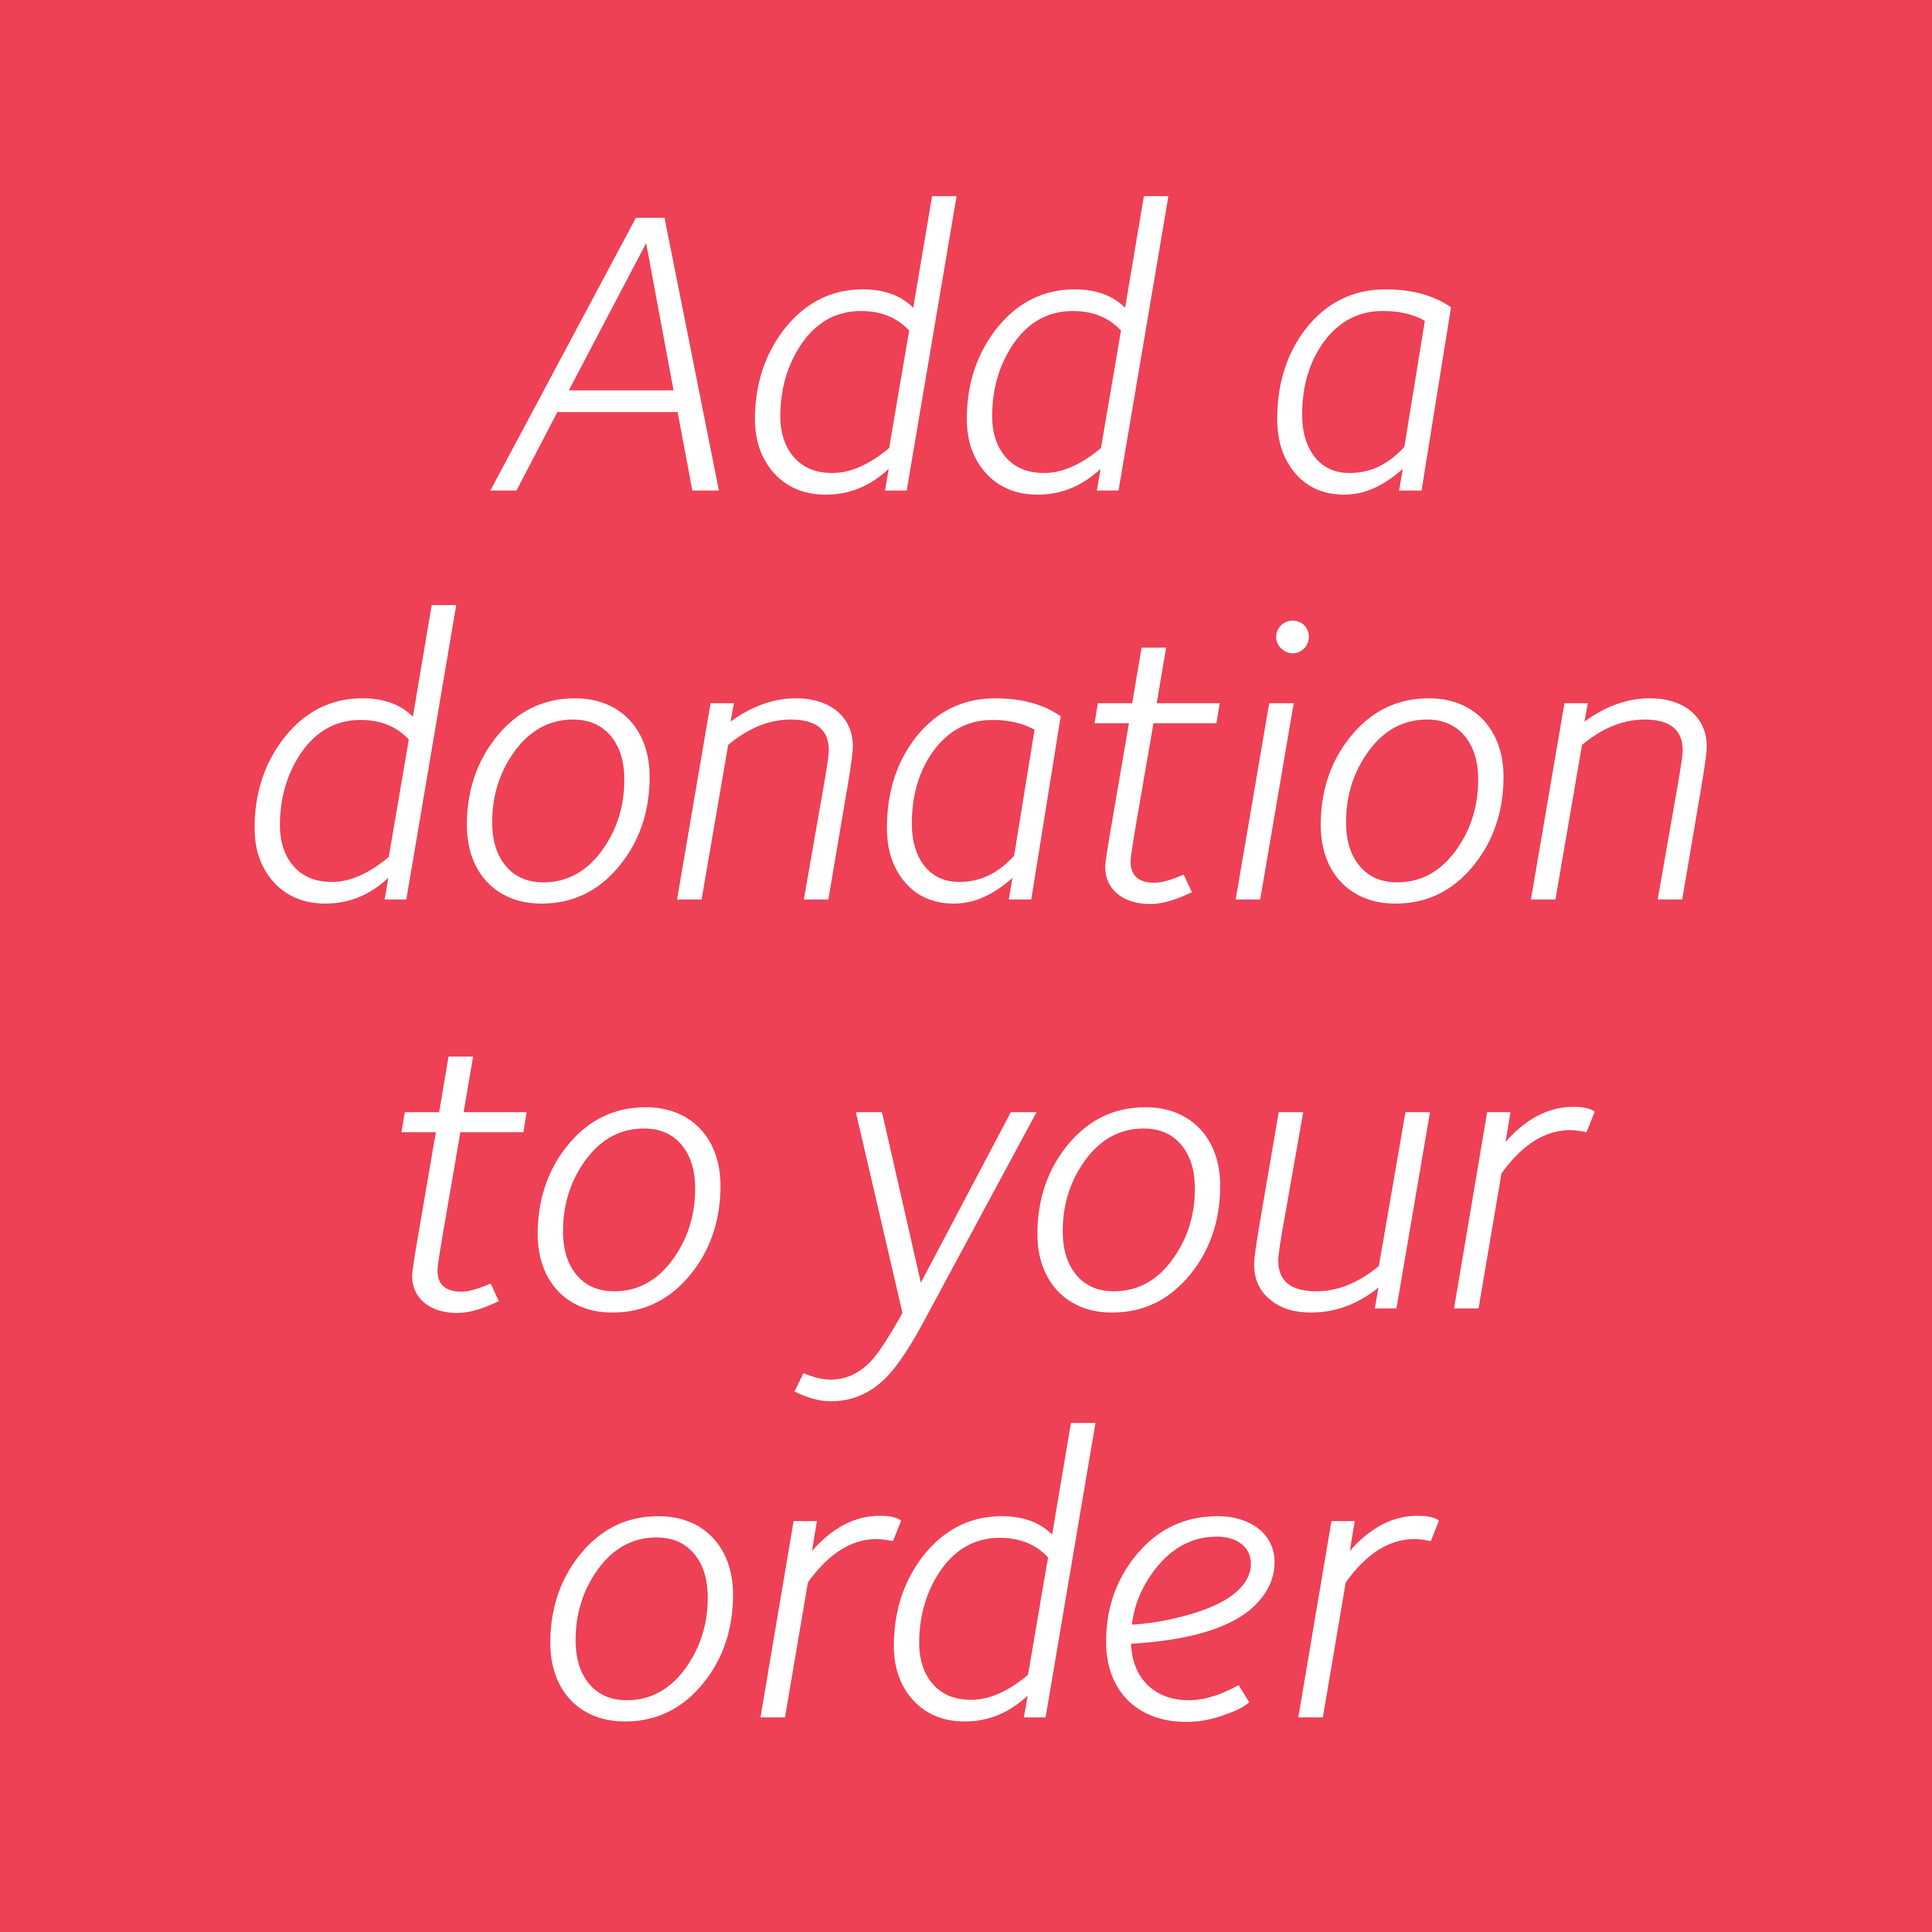 Add a donation to your order